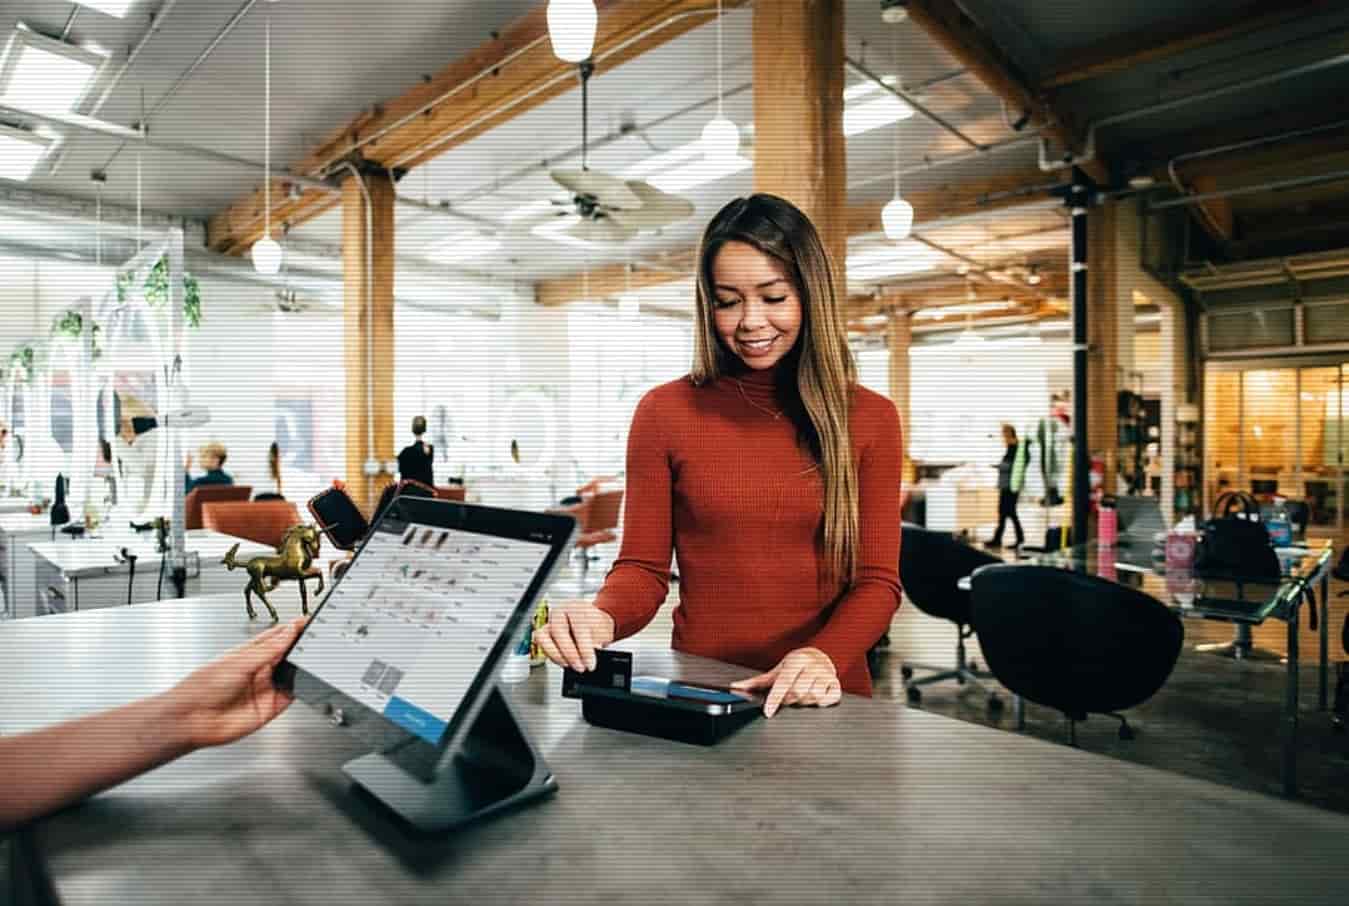 Understanding features and operations POS software before buying